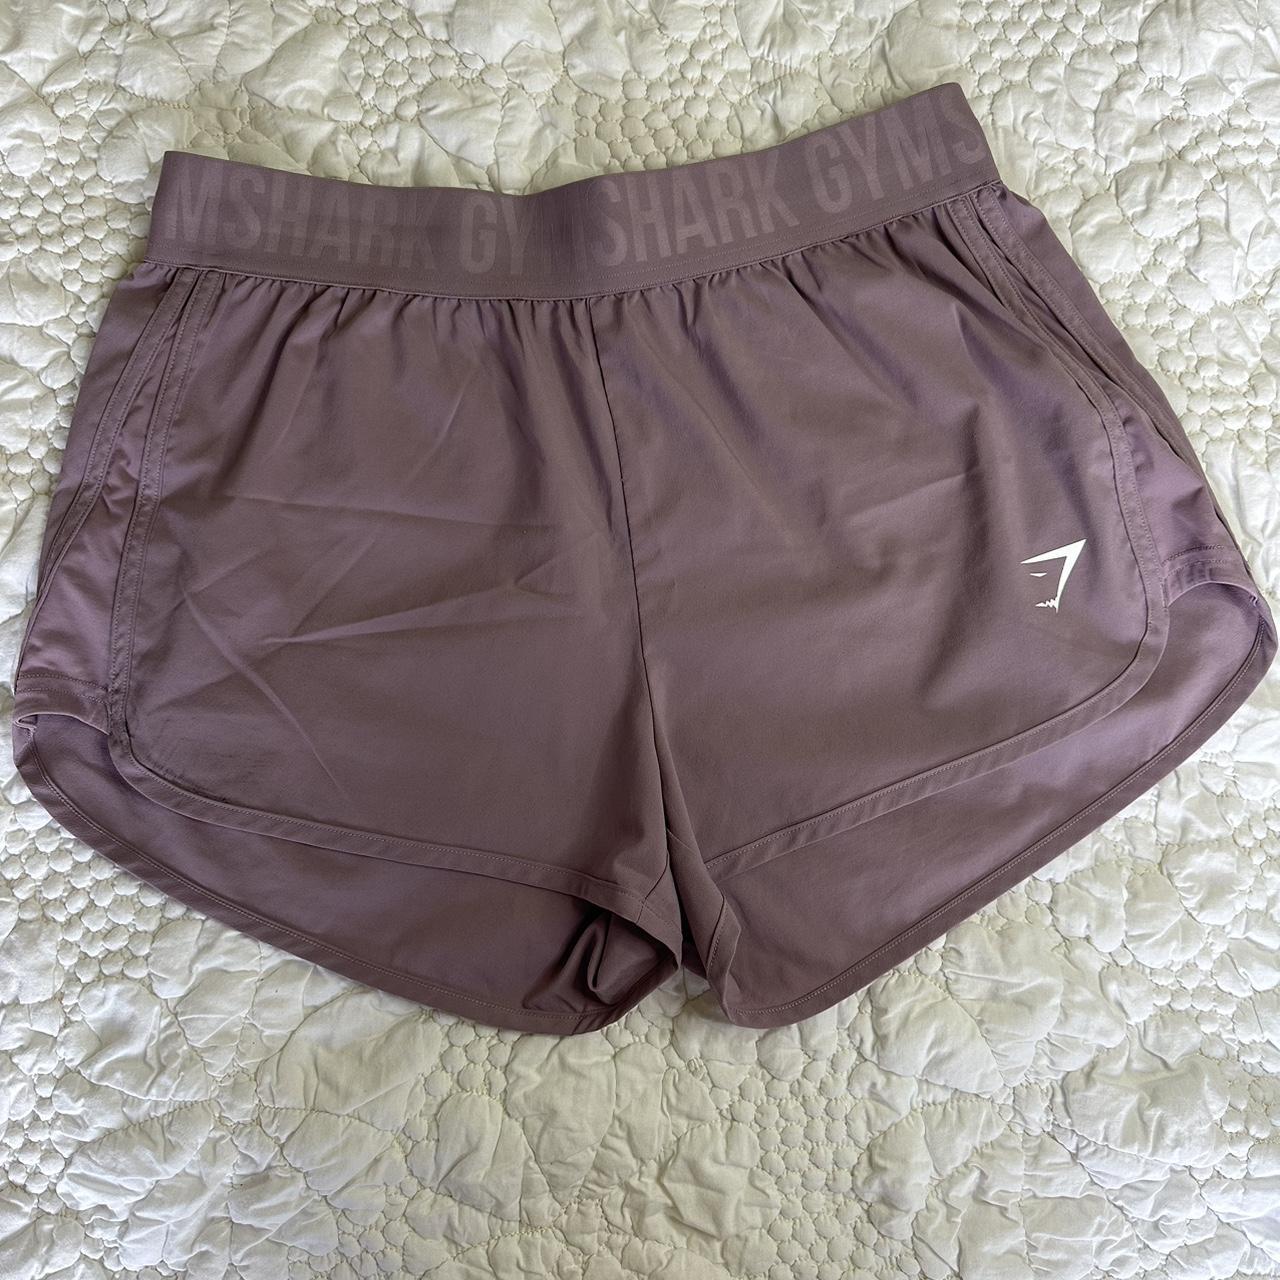 Gymshark Workout Loose Fit Shorts Women's Fitness Sport Shorts Pants Shorts